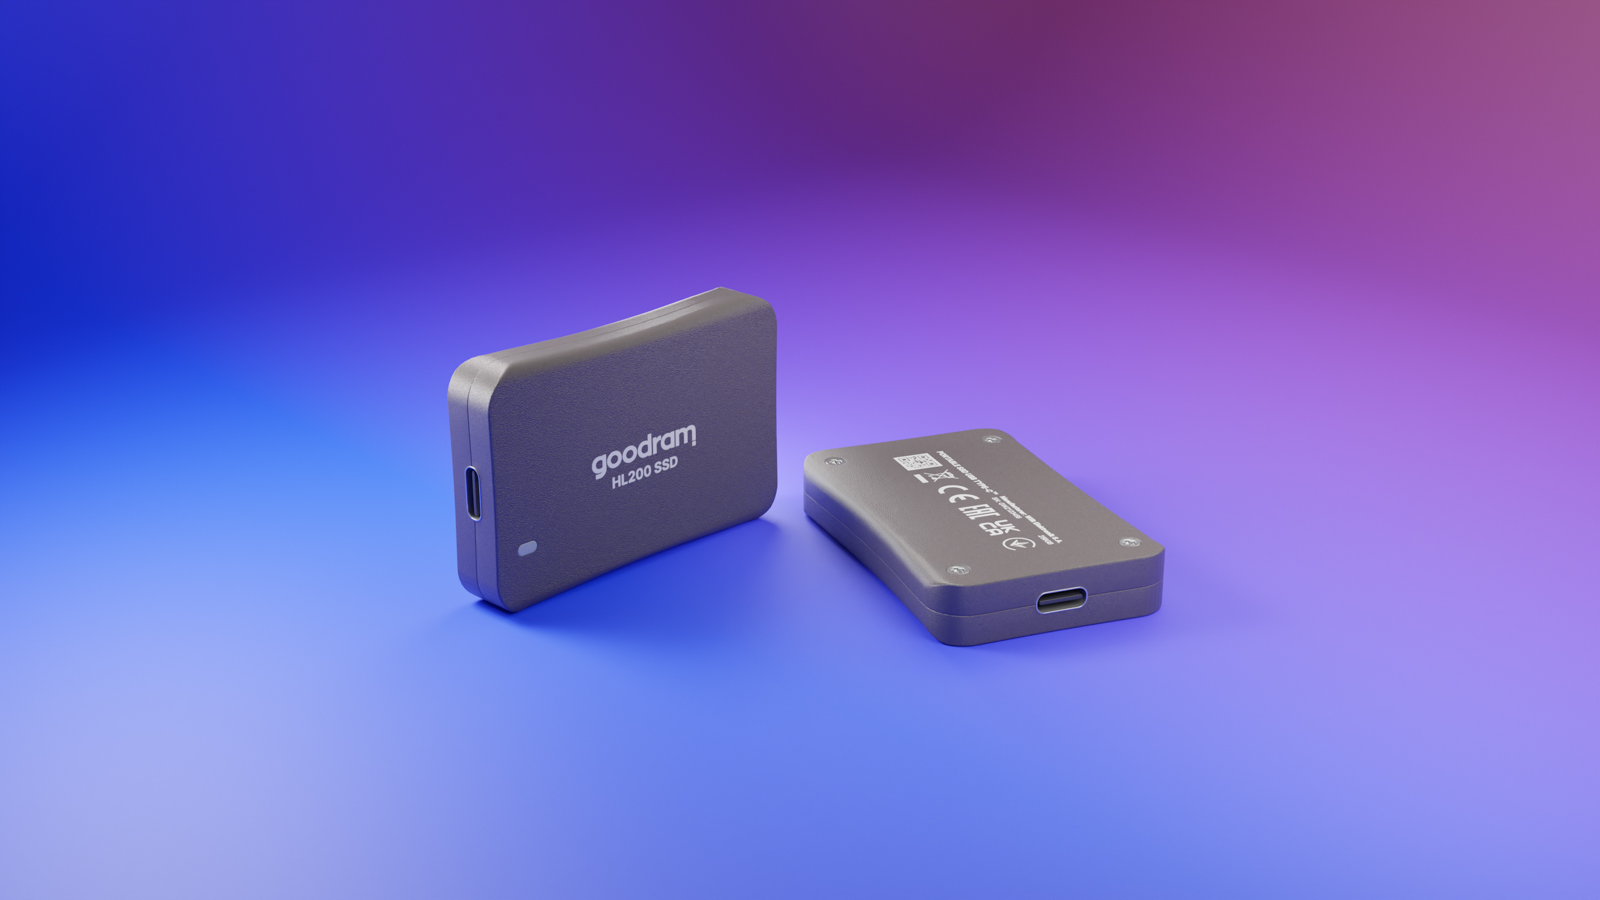 Goodram: expanded the range of external SSDs with the new HL200